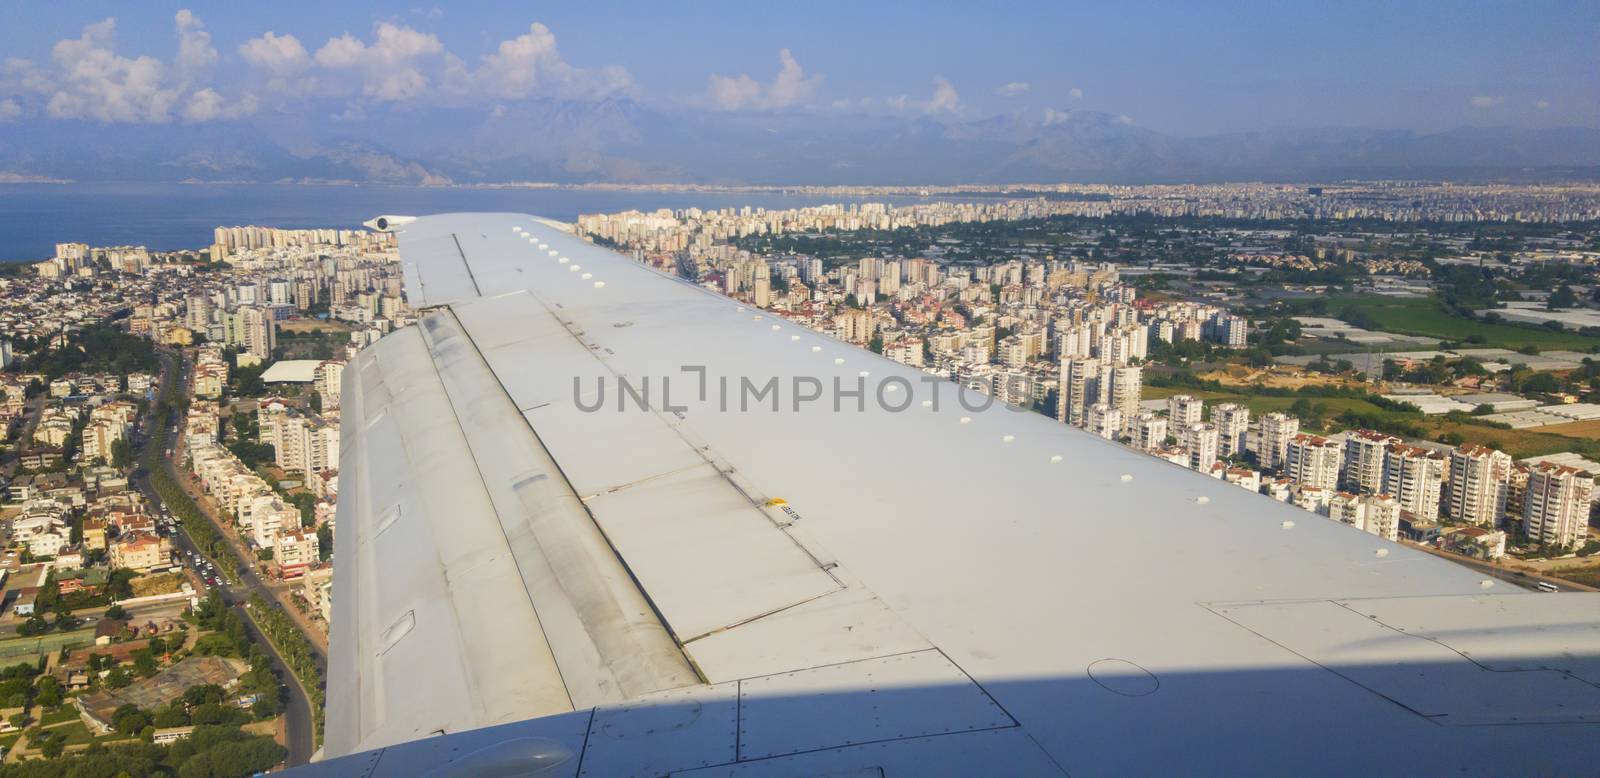 Airplane wing above Antalya by savcoco